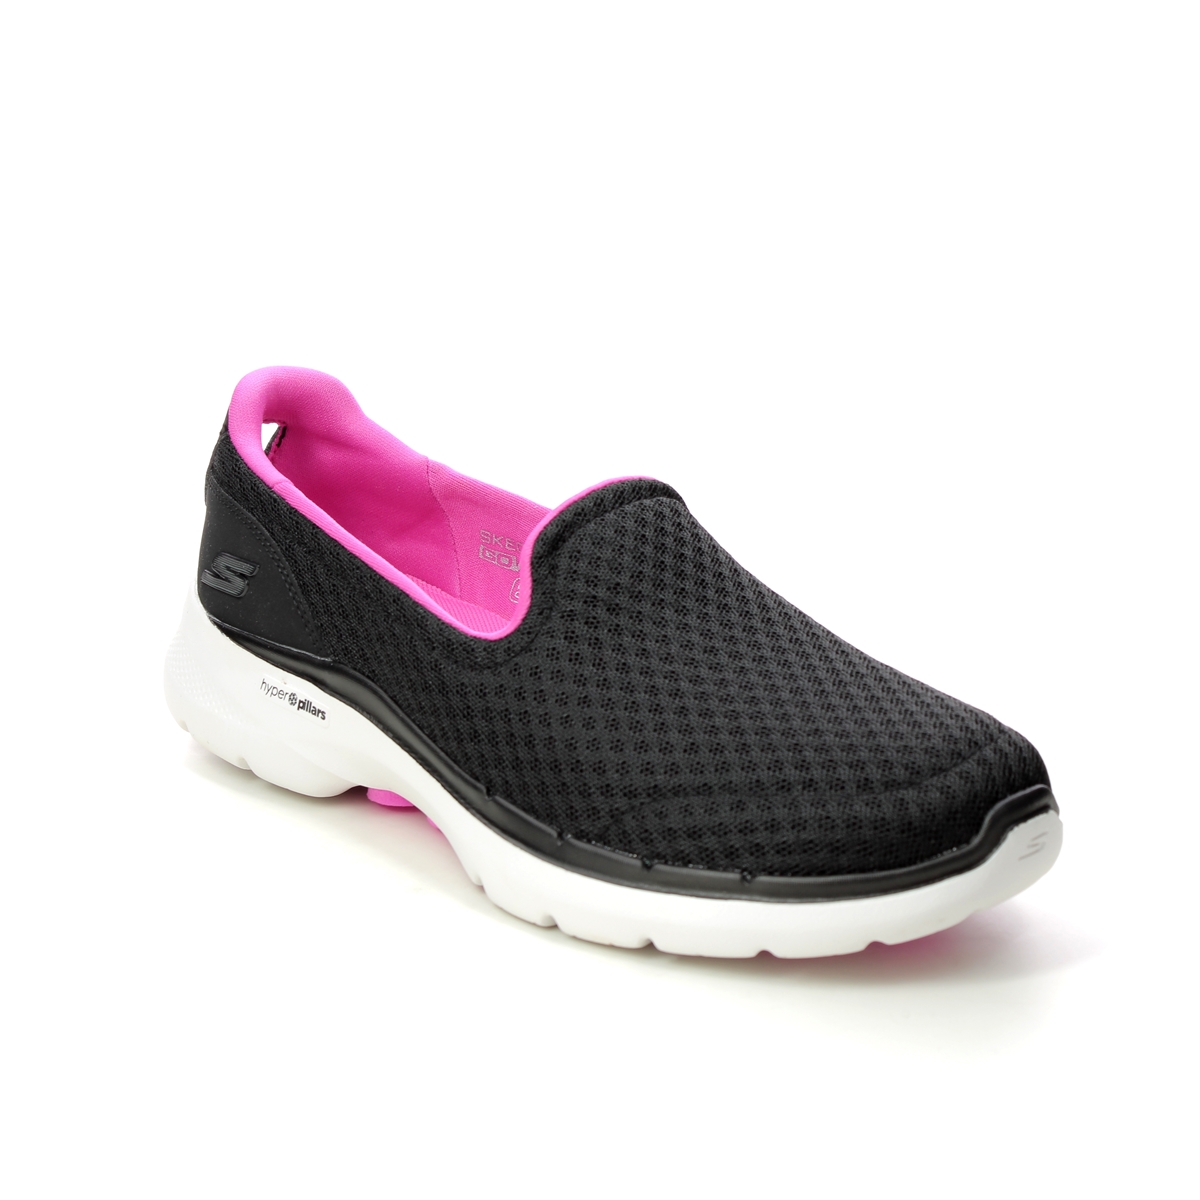 Skechers Go Walk 6 BKHP Black hot pink Womens trainers 124508 in a Plain Textile in Size 7